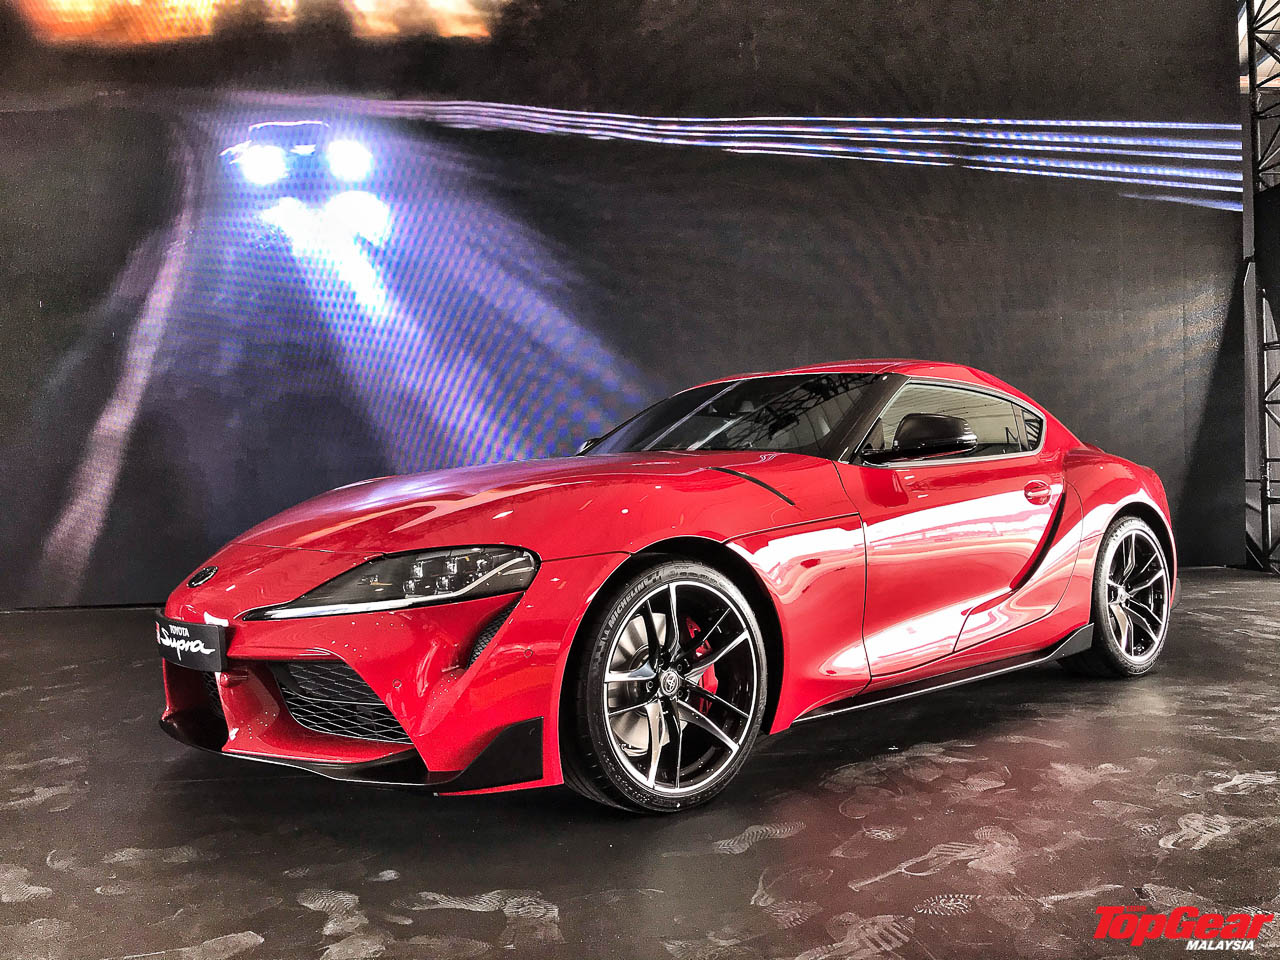 2020 Toyota GR Supra lands with more power